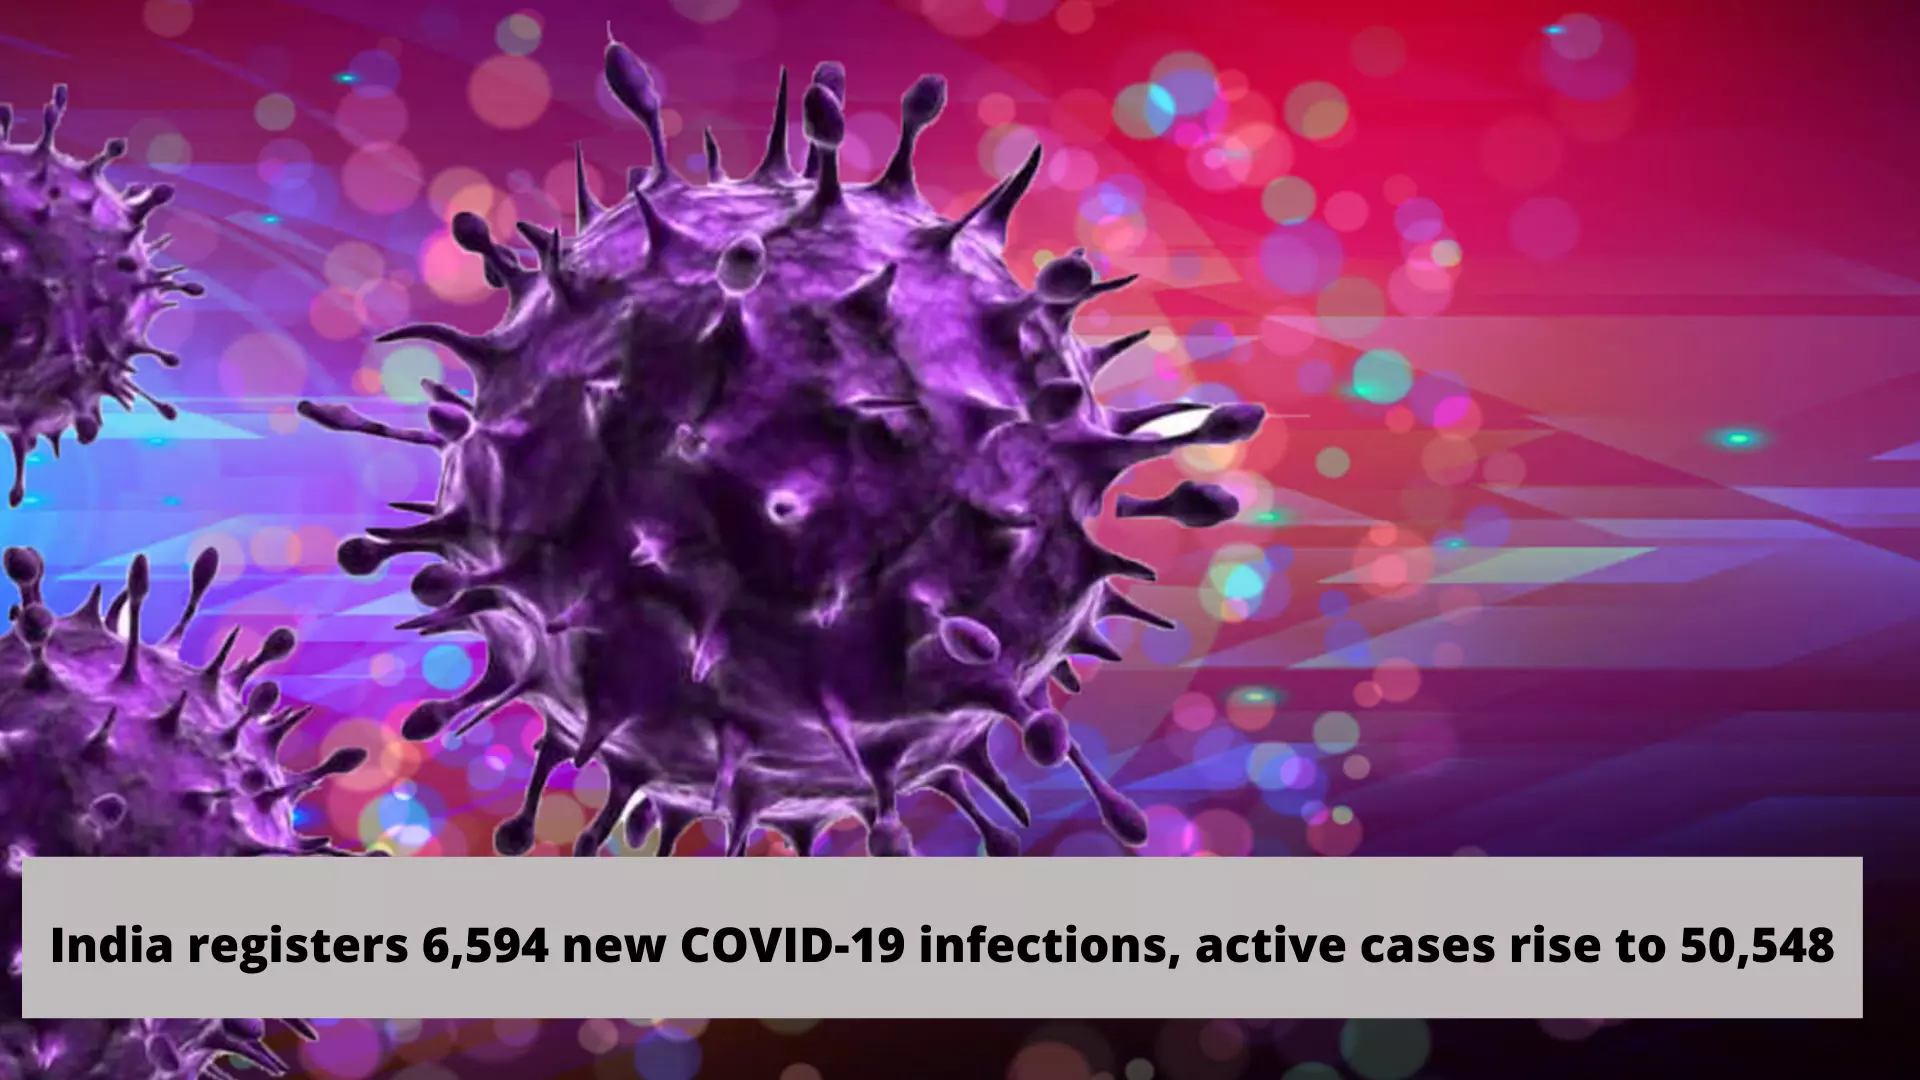 India registers 6,594 new COVID infections, active cases rise to 50,548